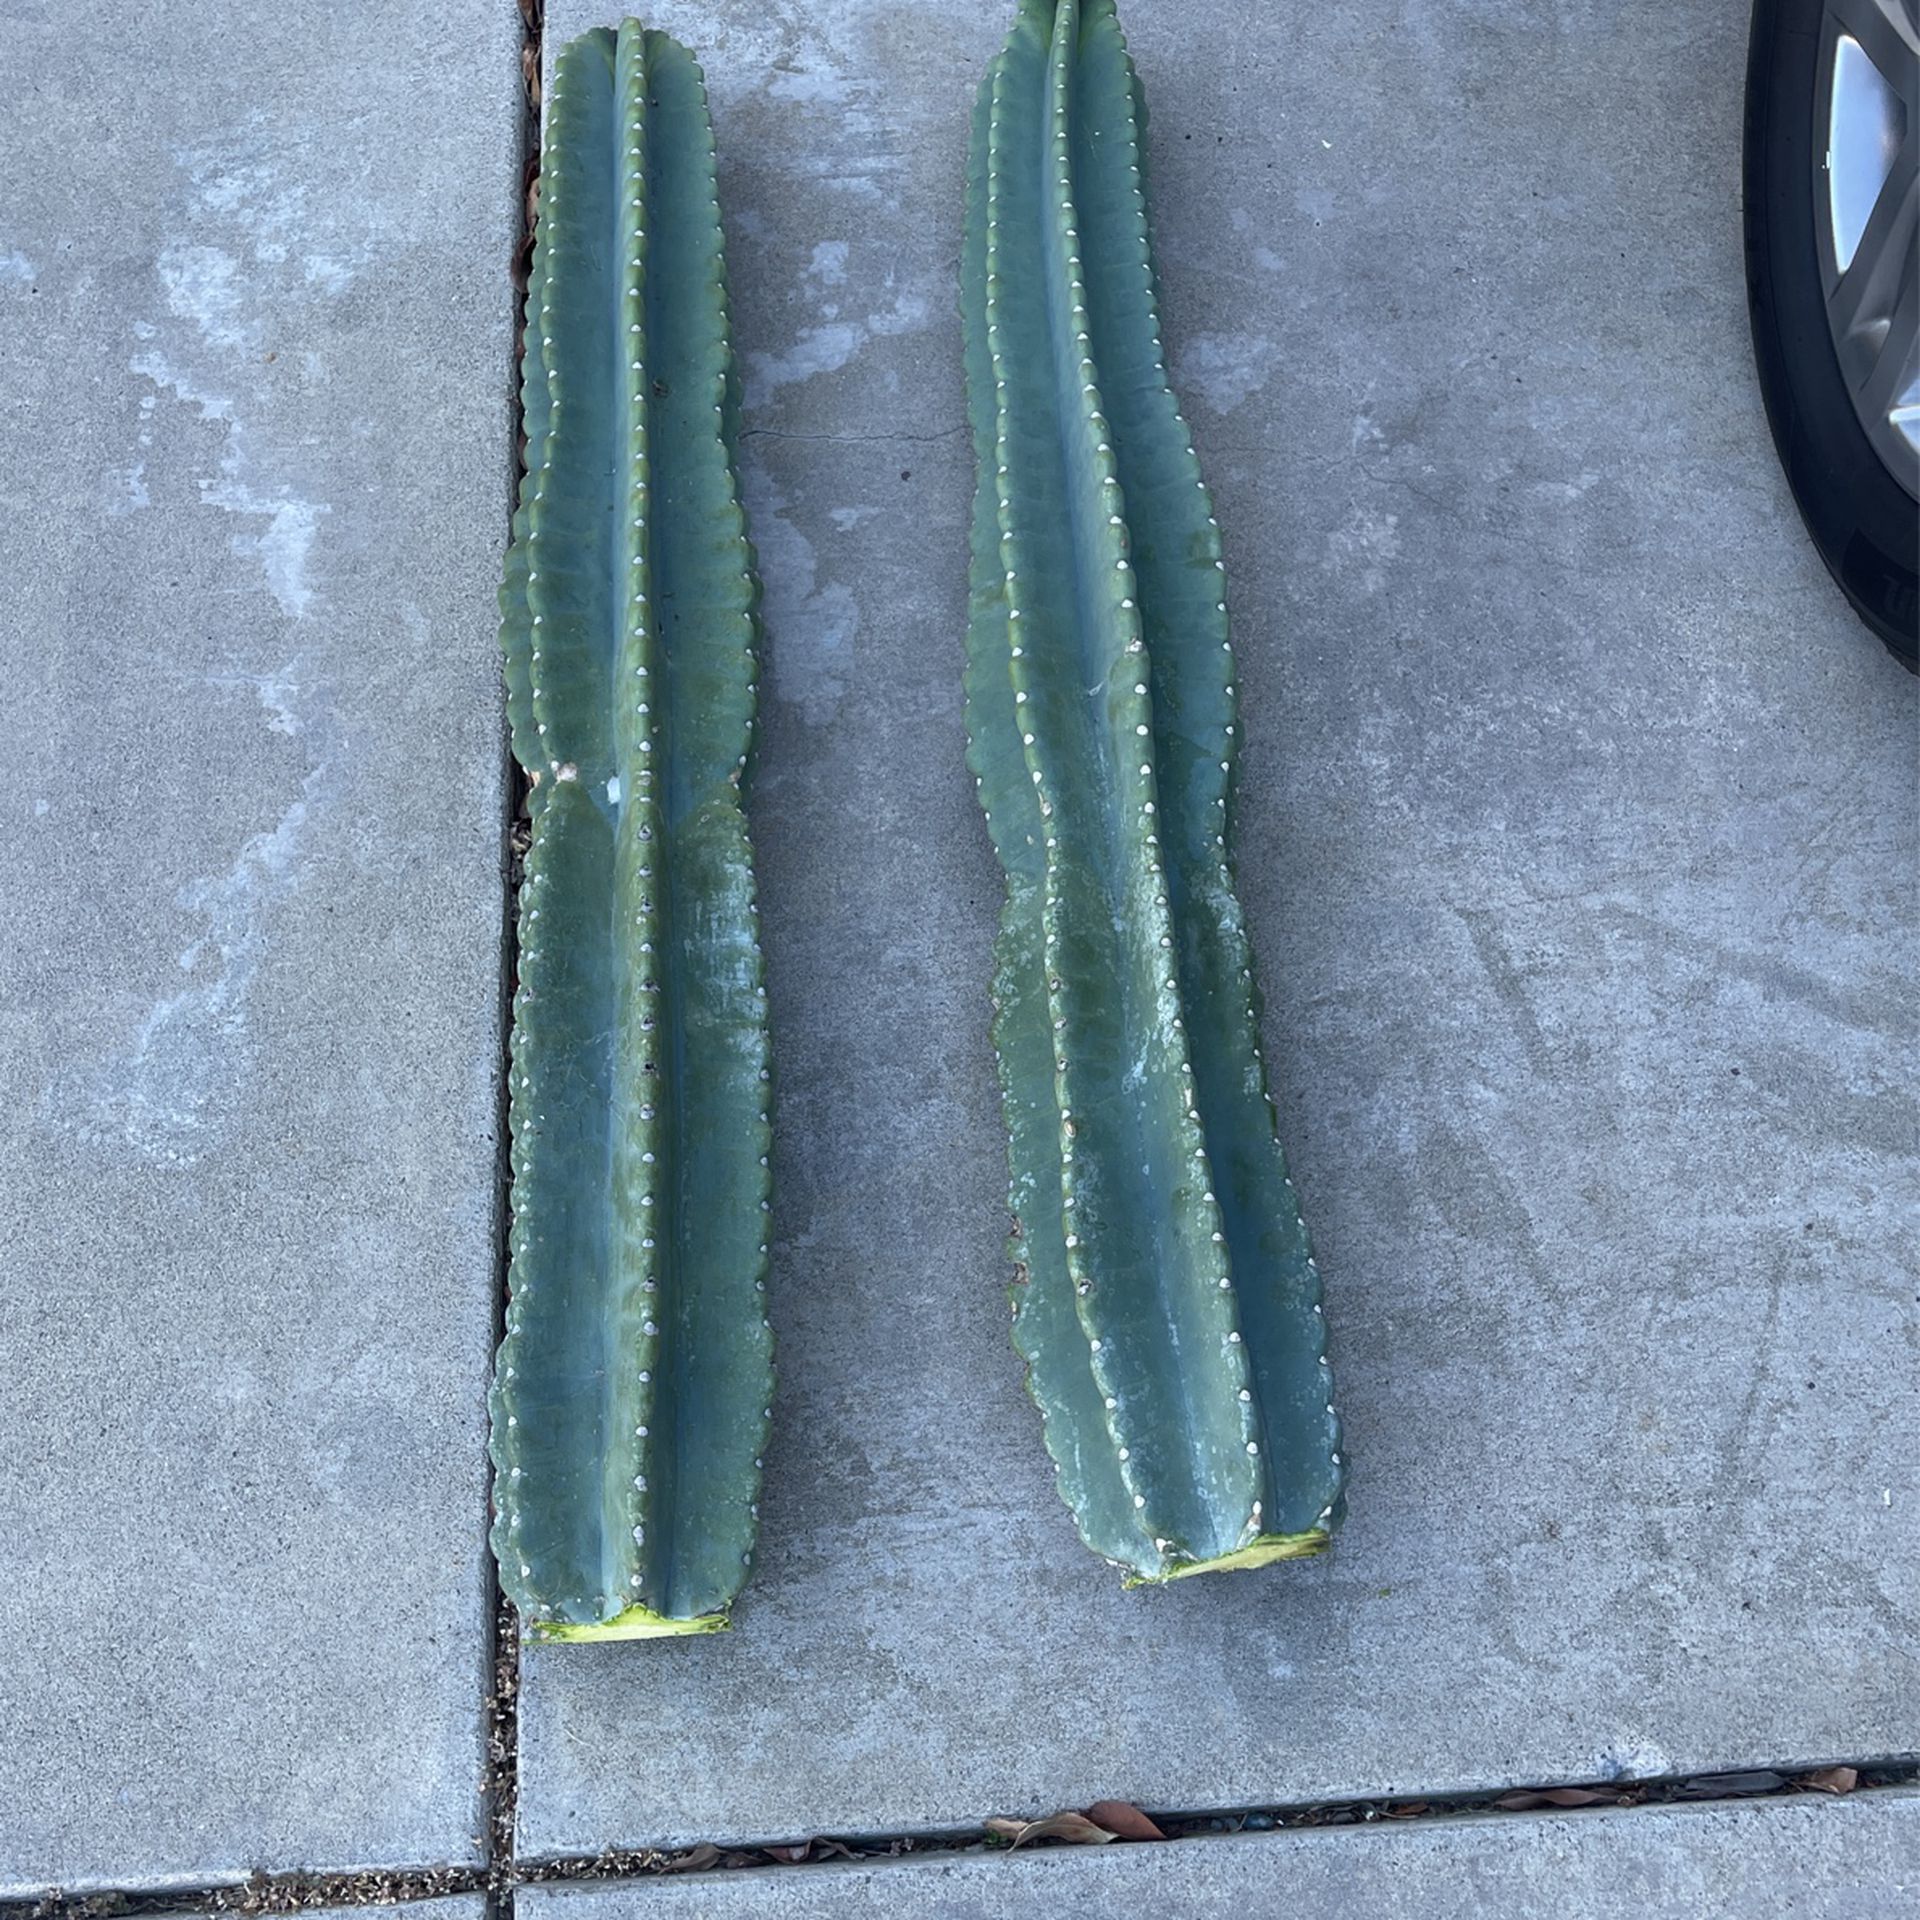 Adult Cutting of these  Flowering San Pedro Cactus .  Get them While they last . 